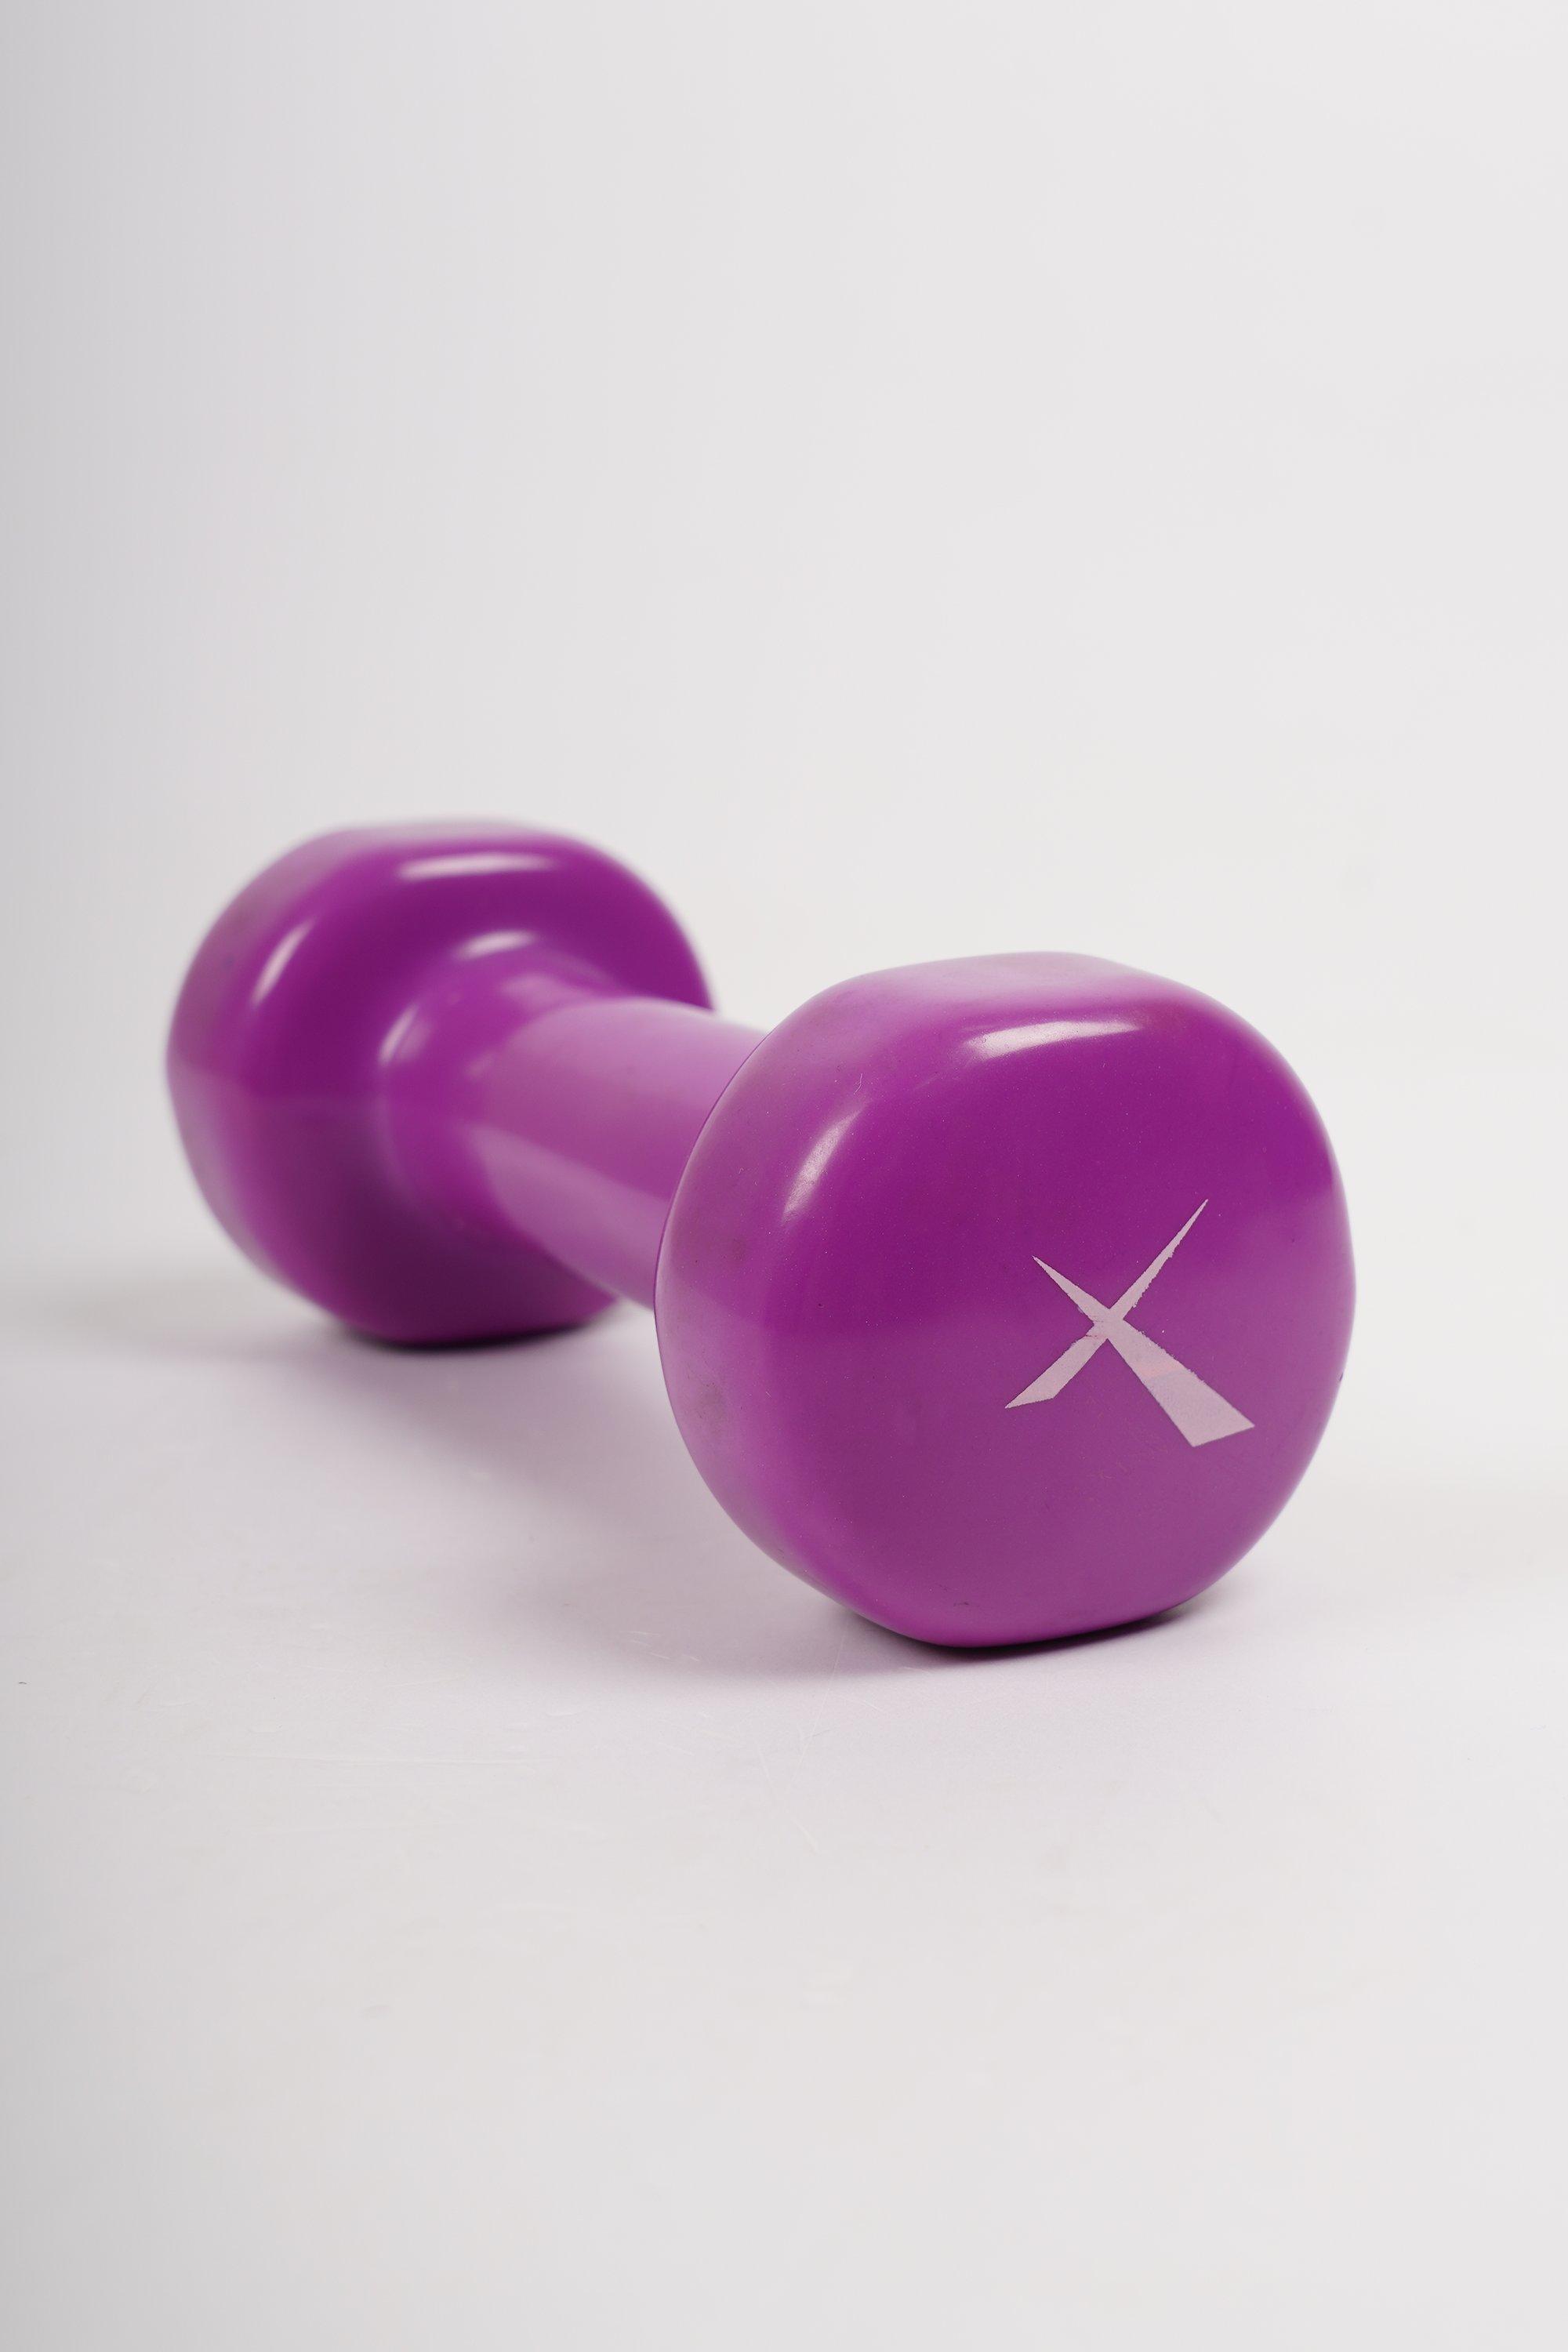 Dumbbells 2kg S00 - Art of Living - Sports and Lifestyle